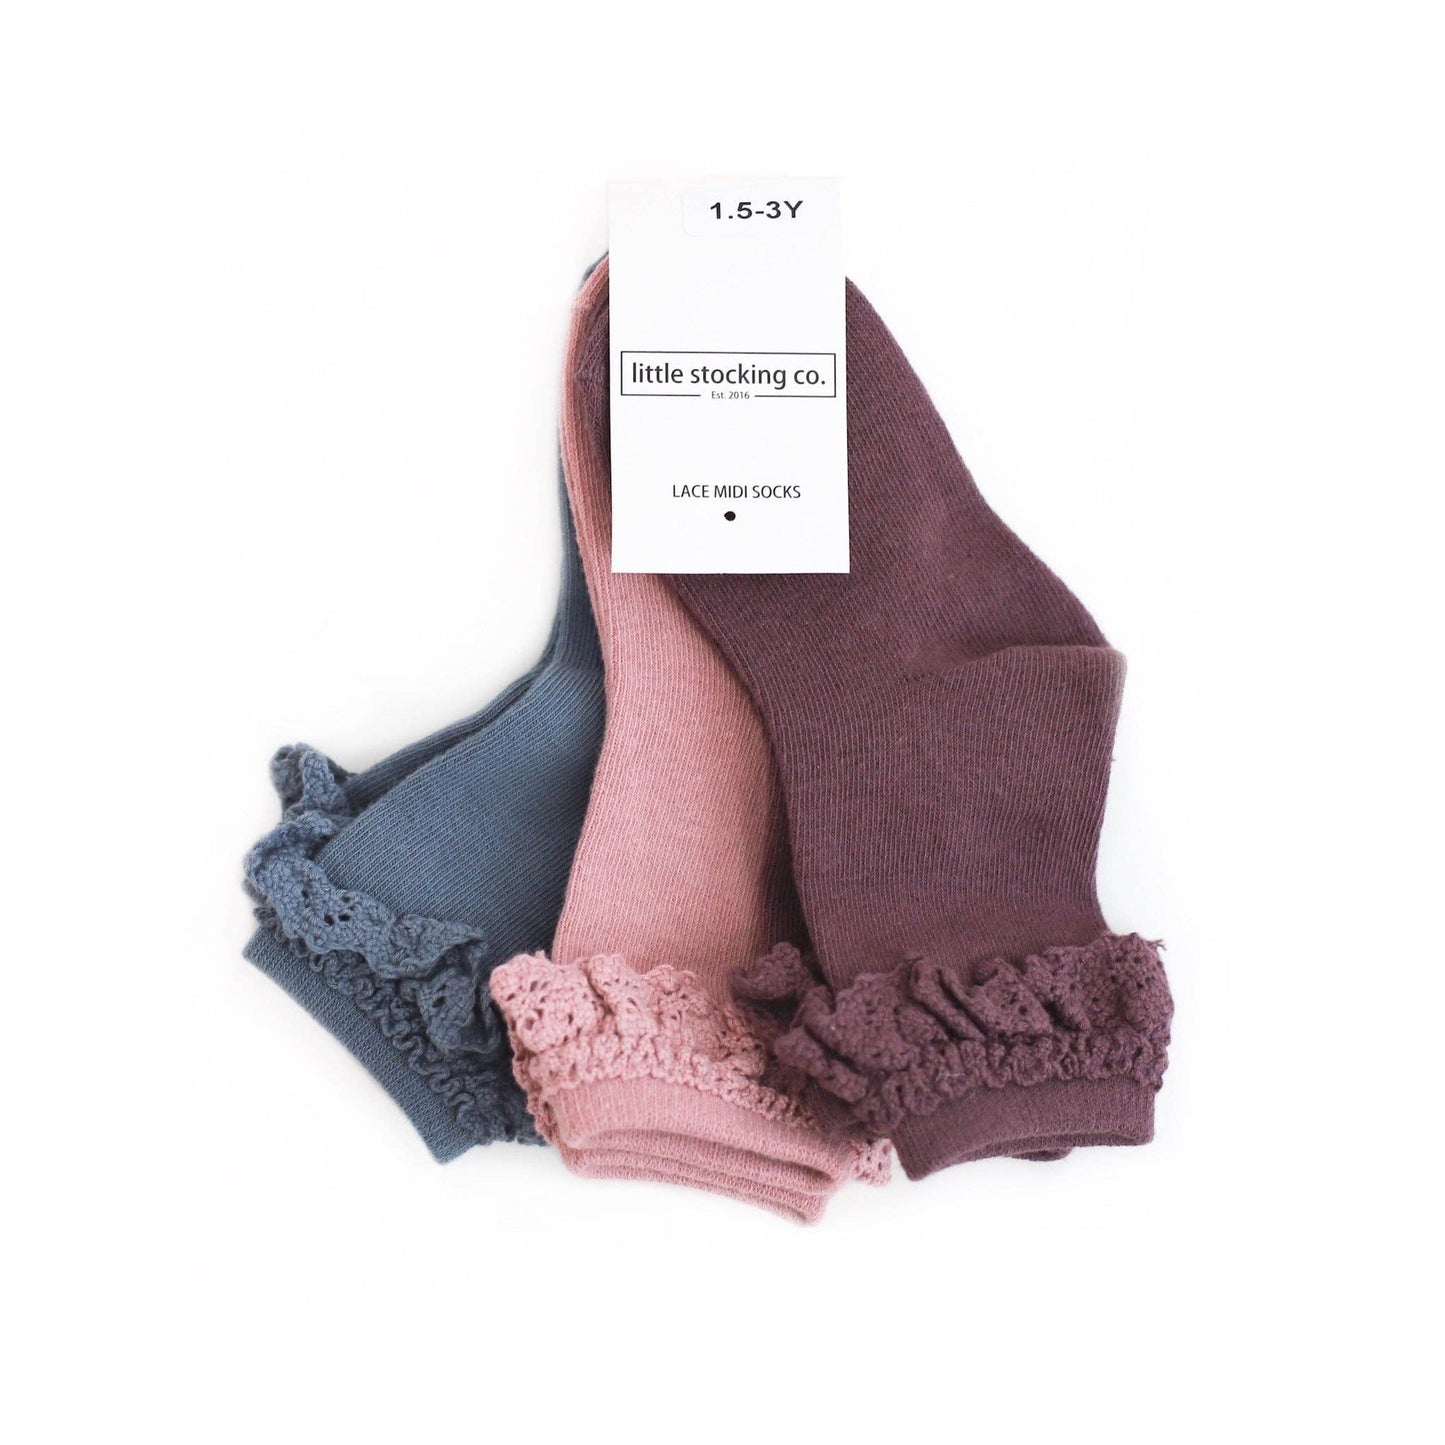 Little Stocking Co. - Daydreamer Lace Midi Sock 3-pack: 6-18 MONTHS